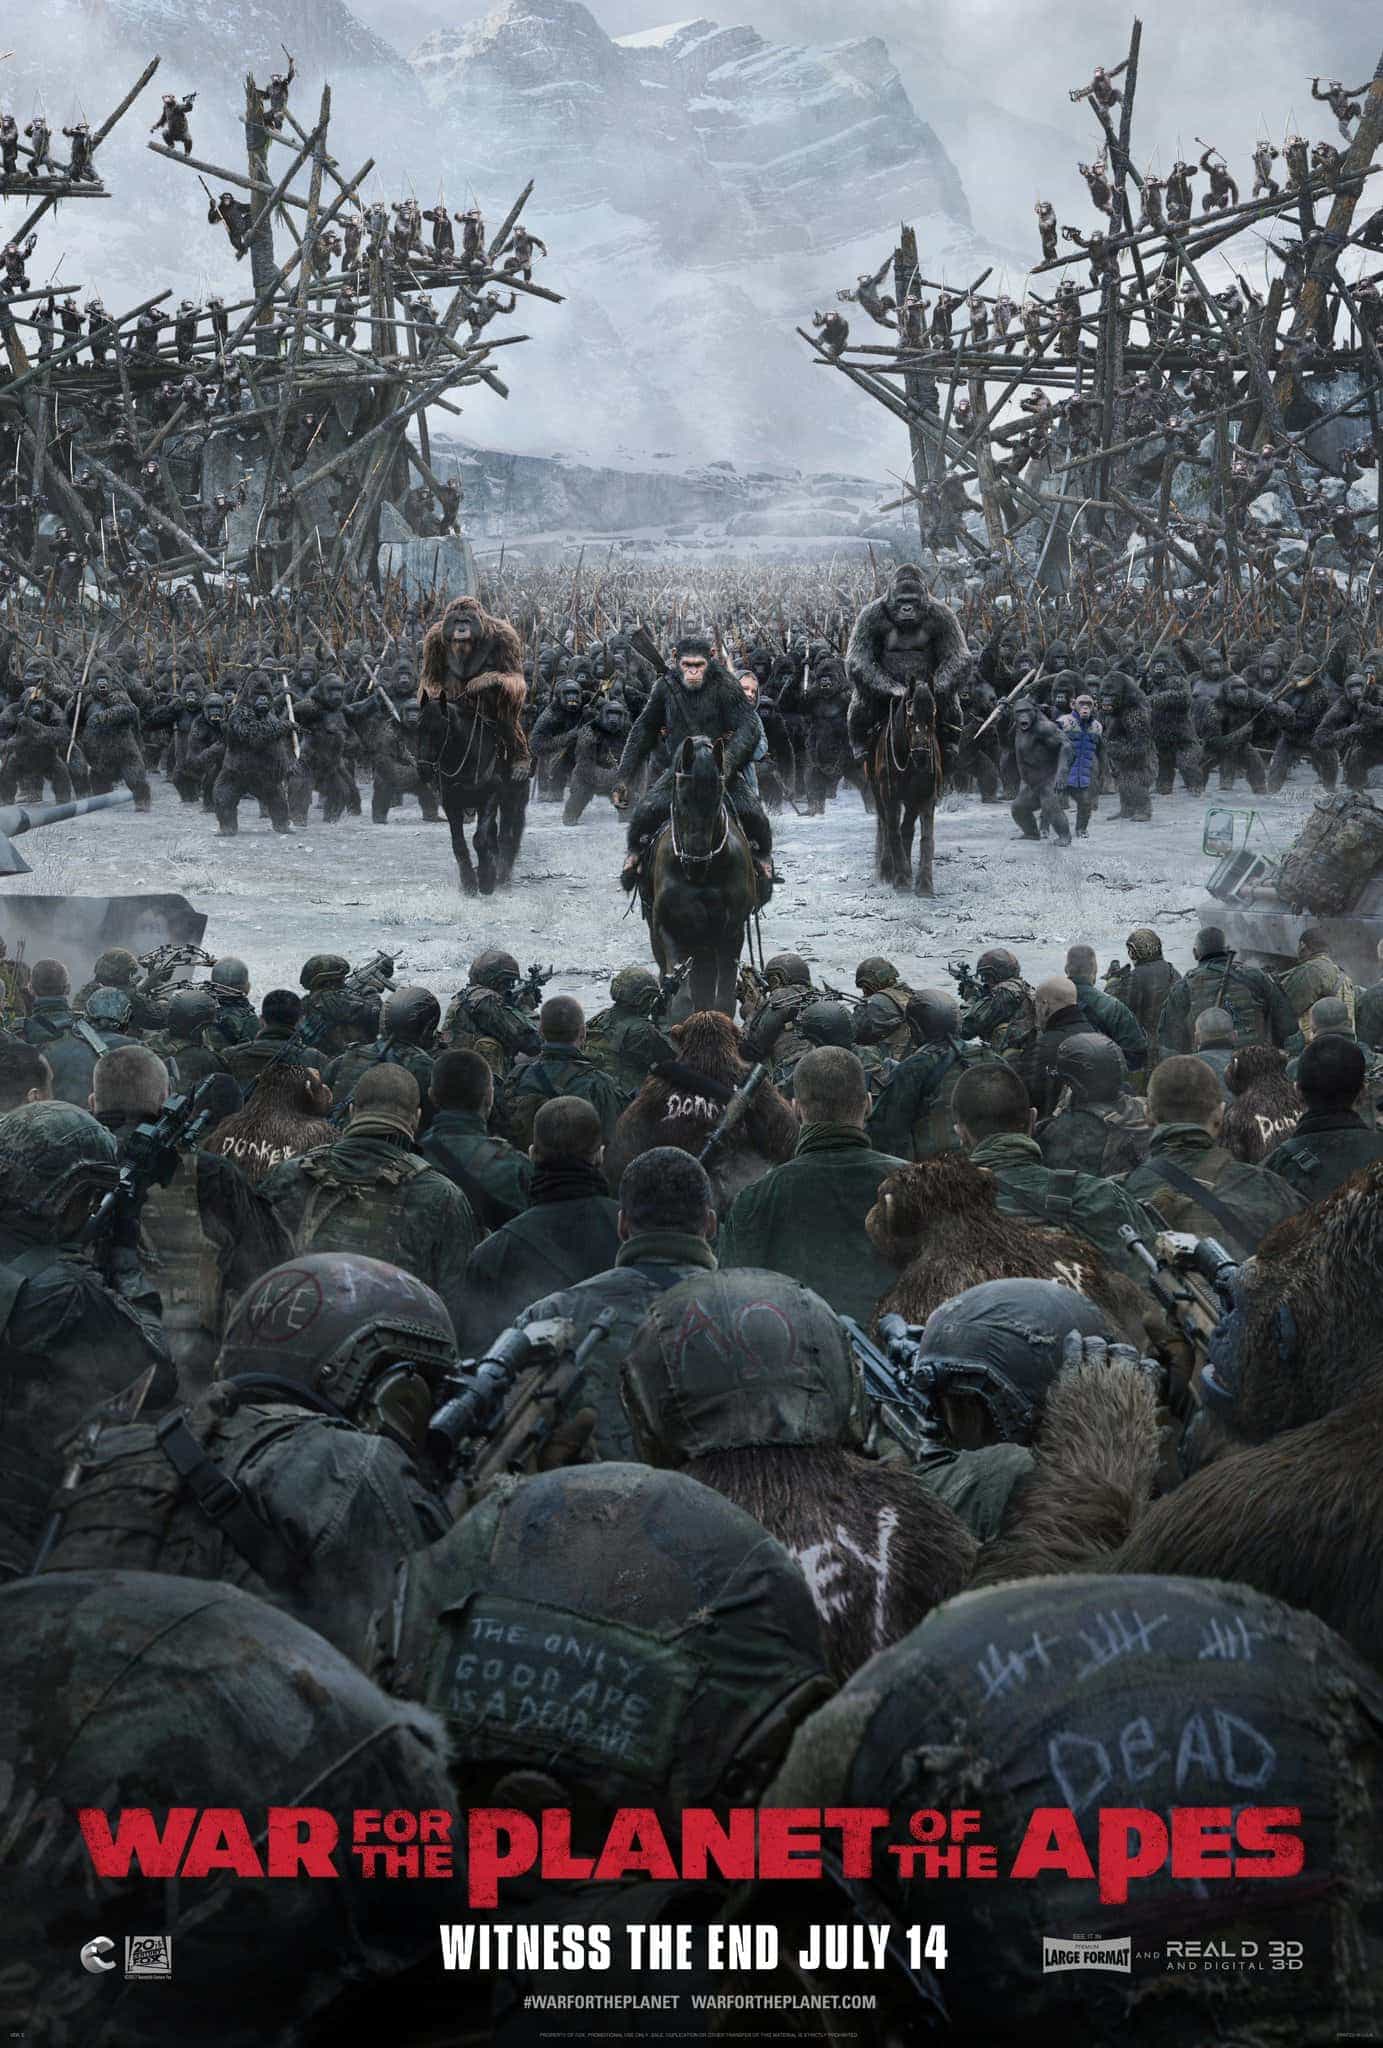 War For the Planet of The Apes gets a 12A certificate